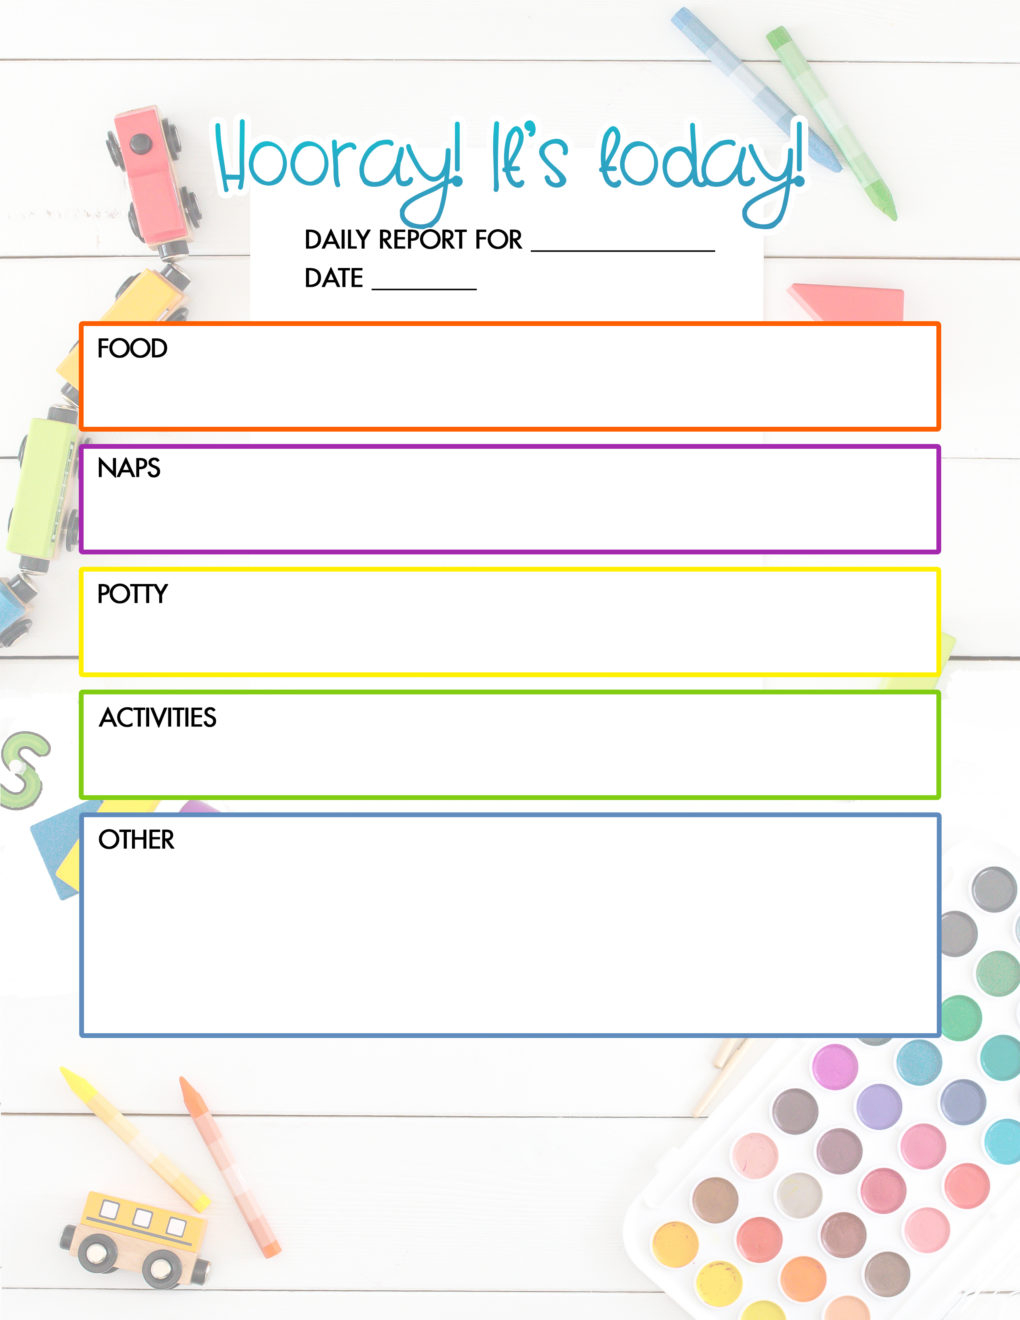 Free Daycare Daily Report  Child Care Printable - The DIY Lighthouse With Preschool Weekly Report Template